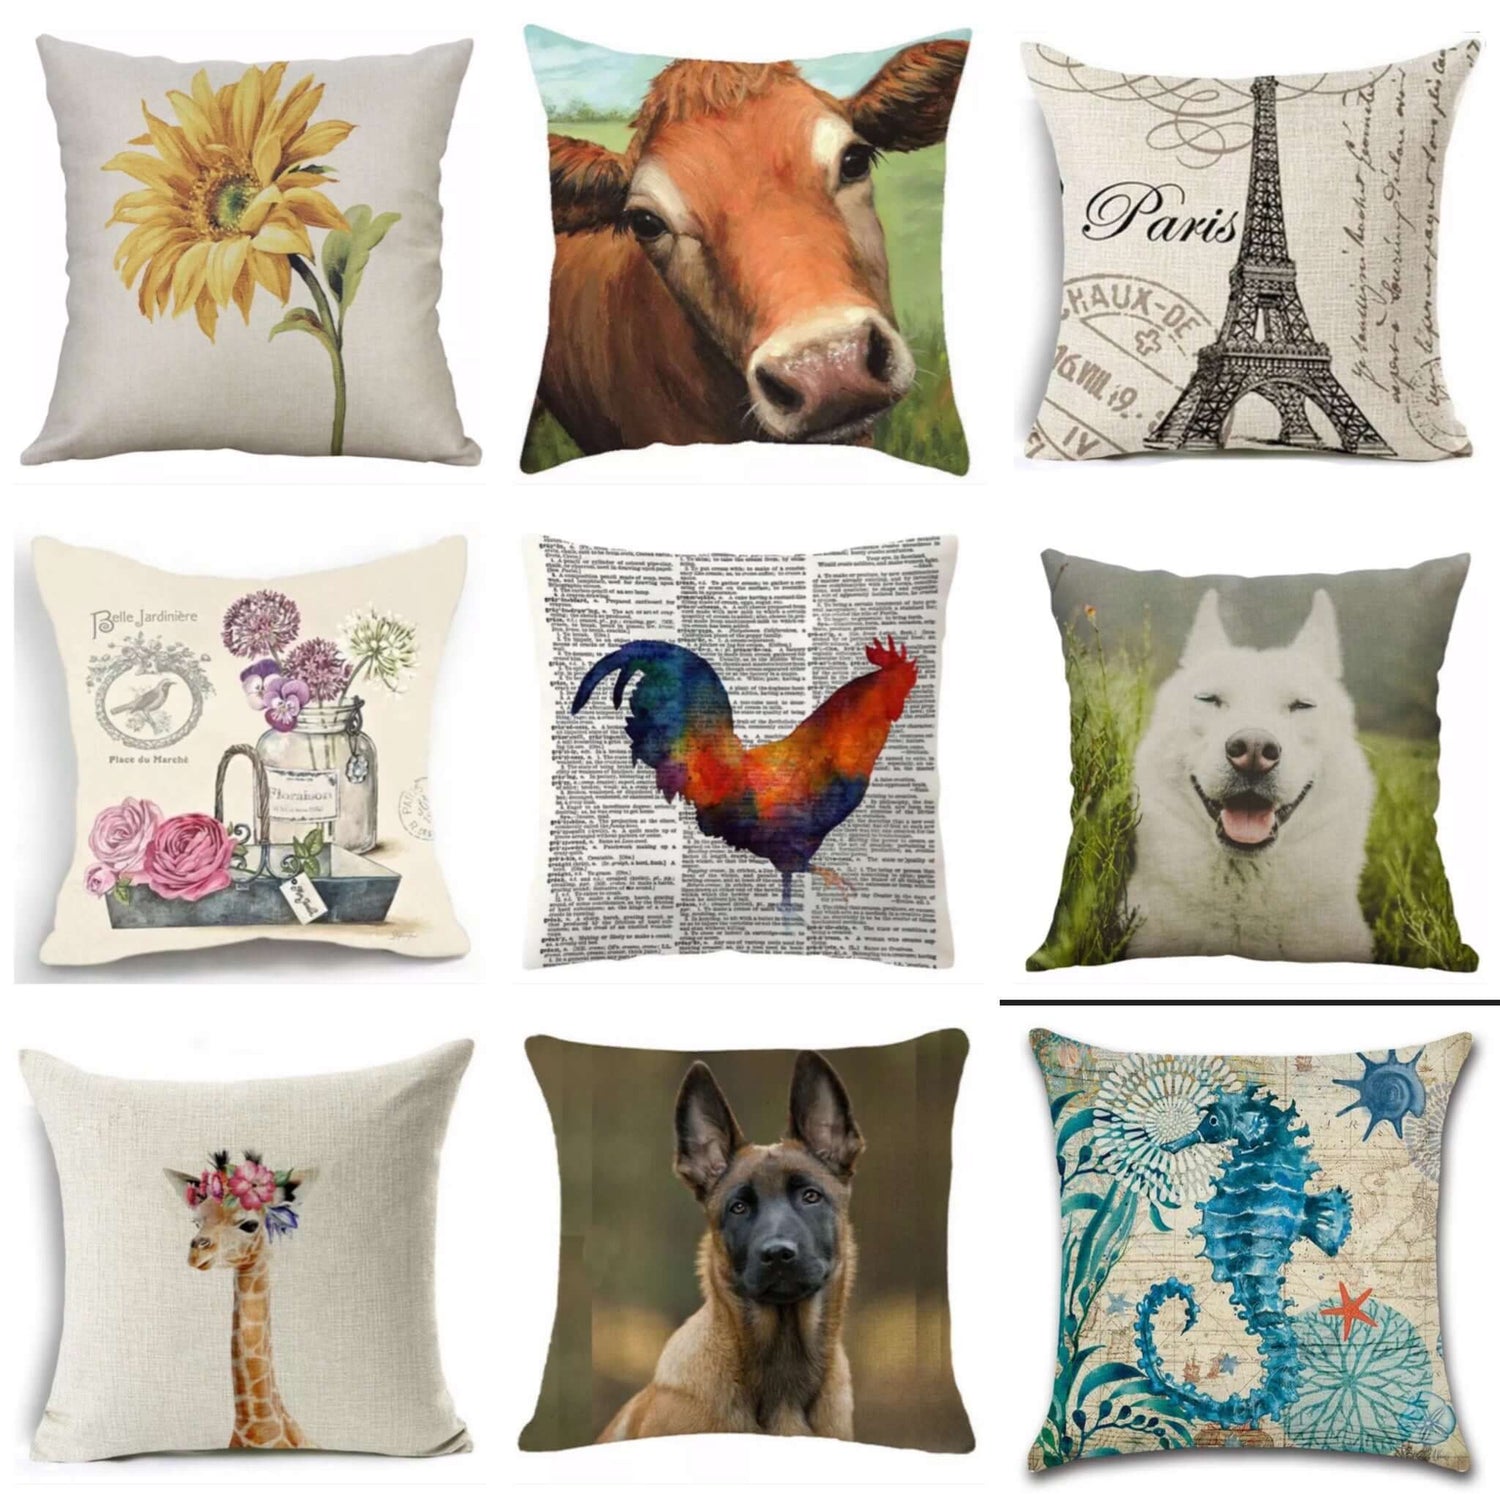 Cushions and Decorative Pillows